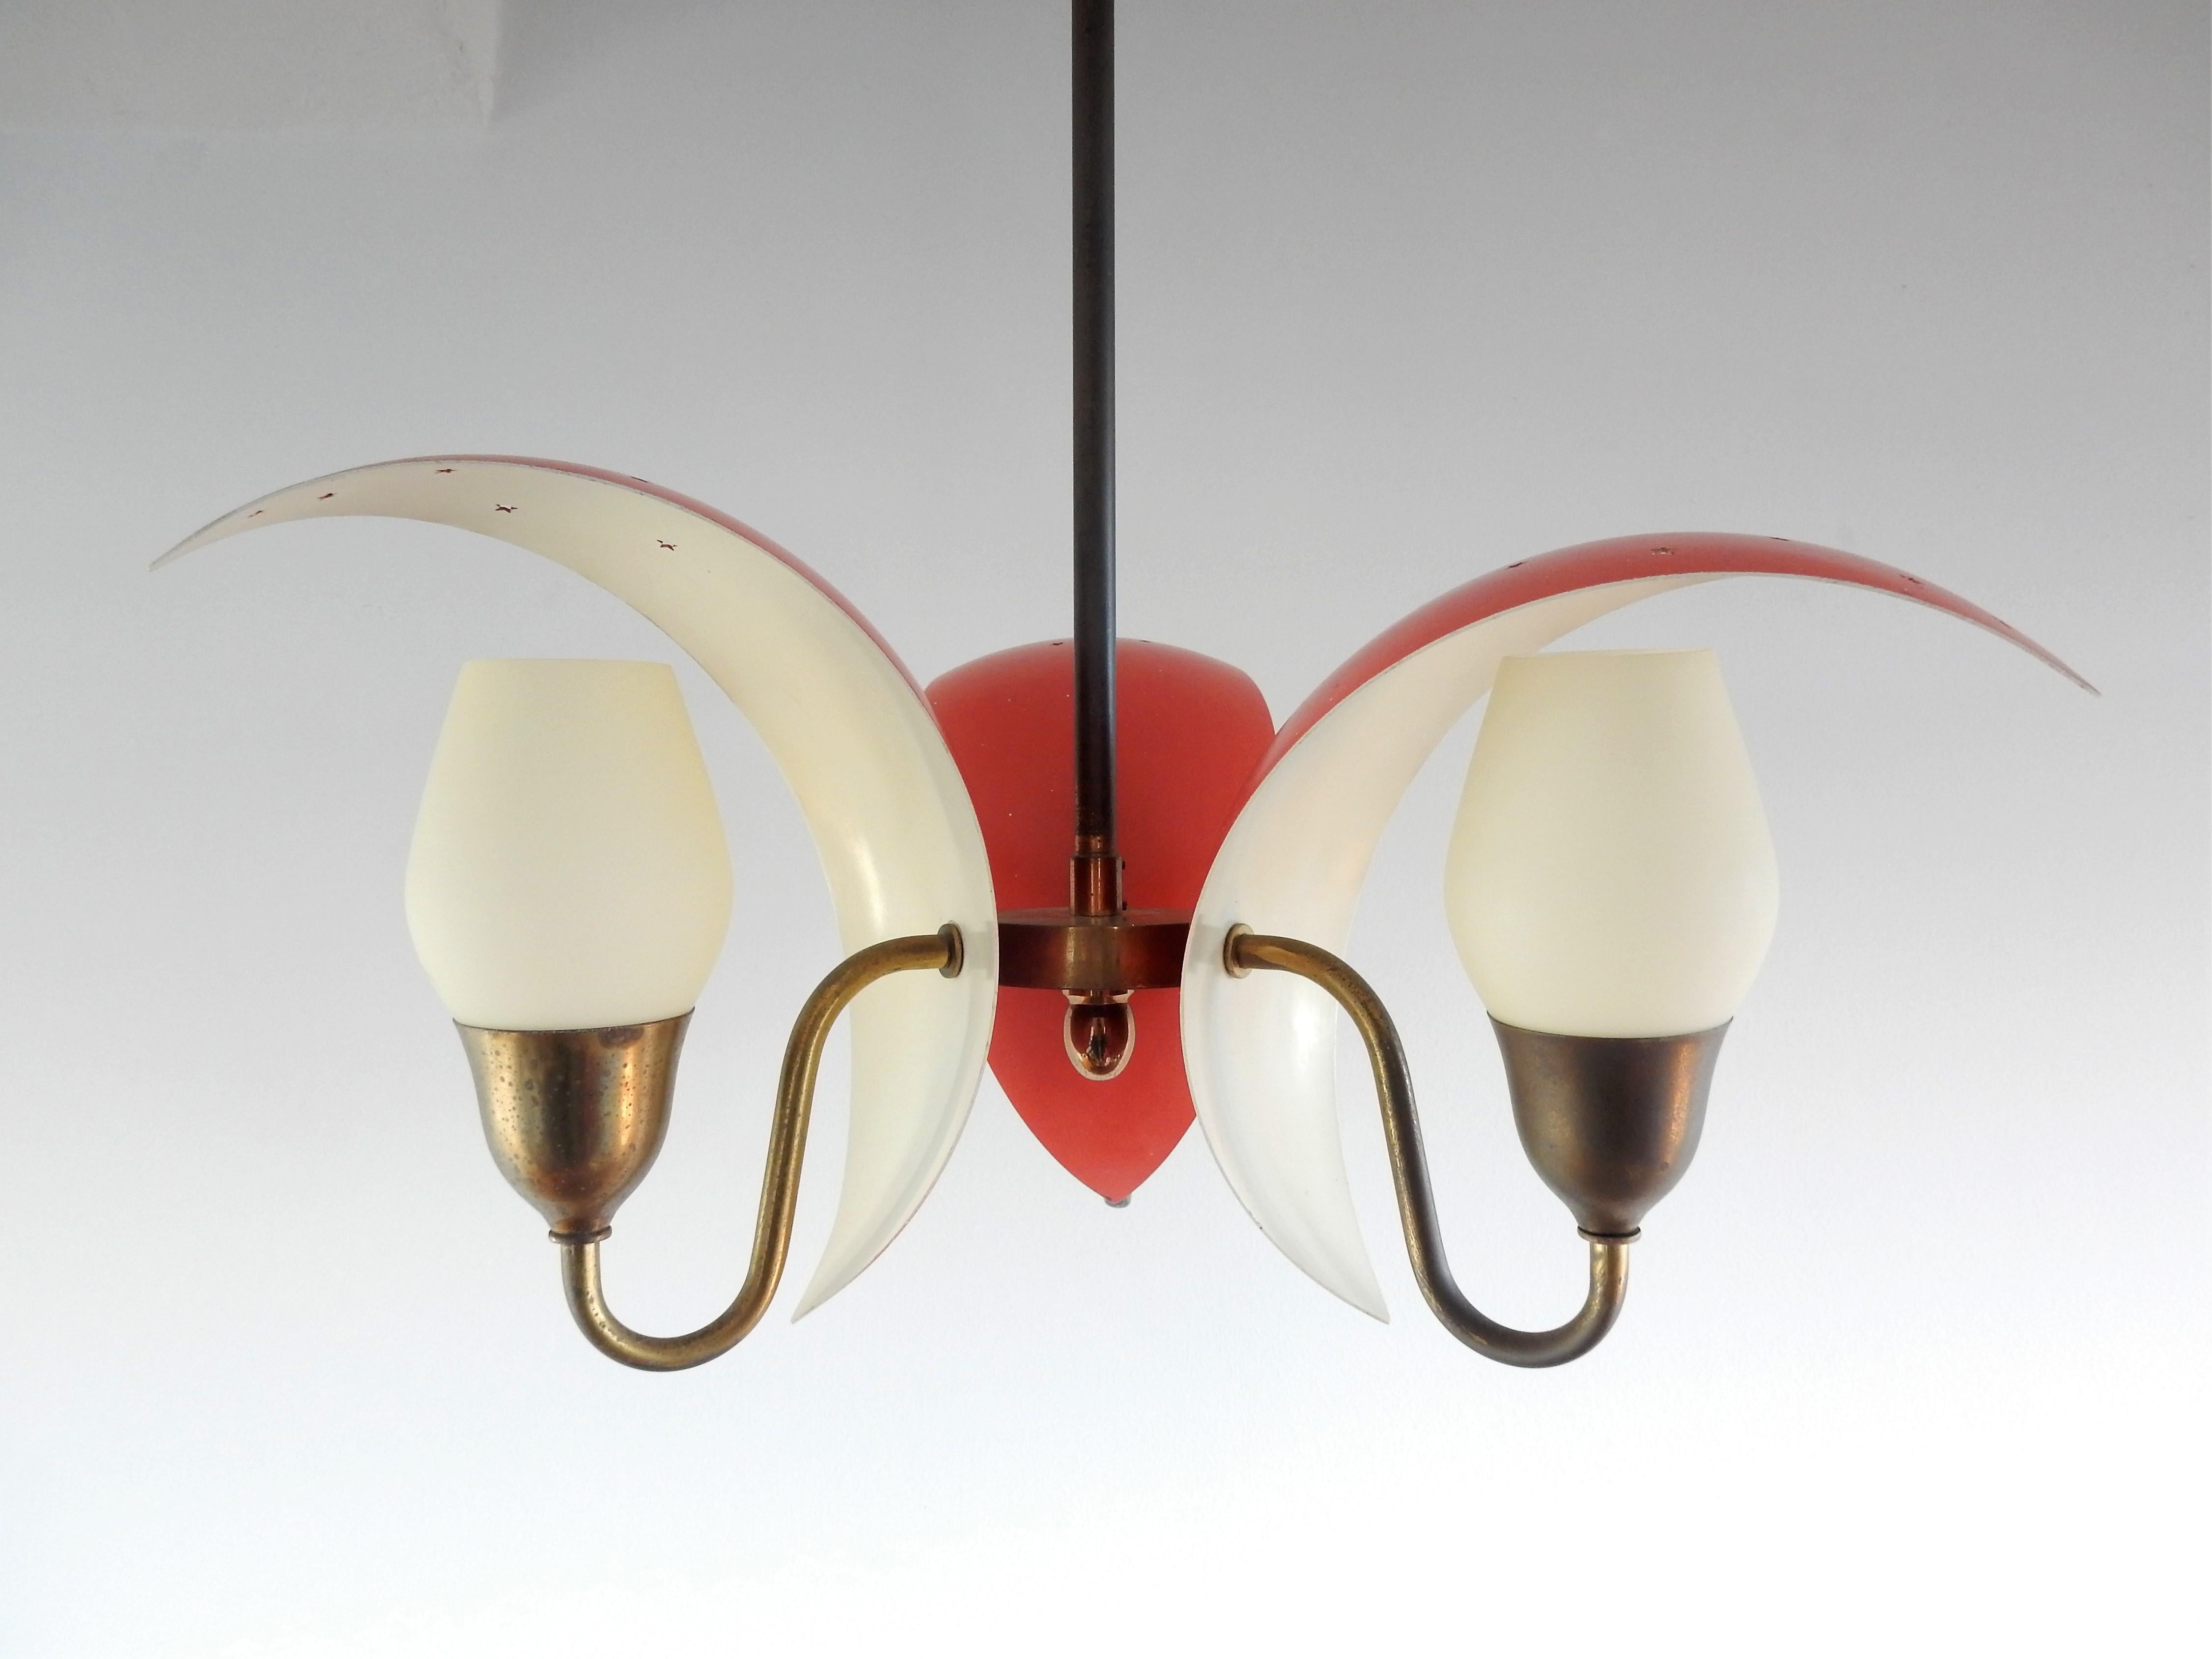 This beautiful small three-arm chandelier has a brass frame and 3 red lacquered metal shades with star shaped perforations. Small opaline glass shades diffuse the light. A very nice design that suits well in a corridor or bedroom for example. It is